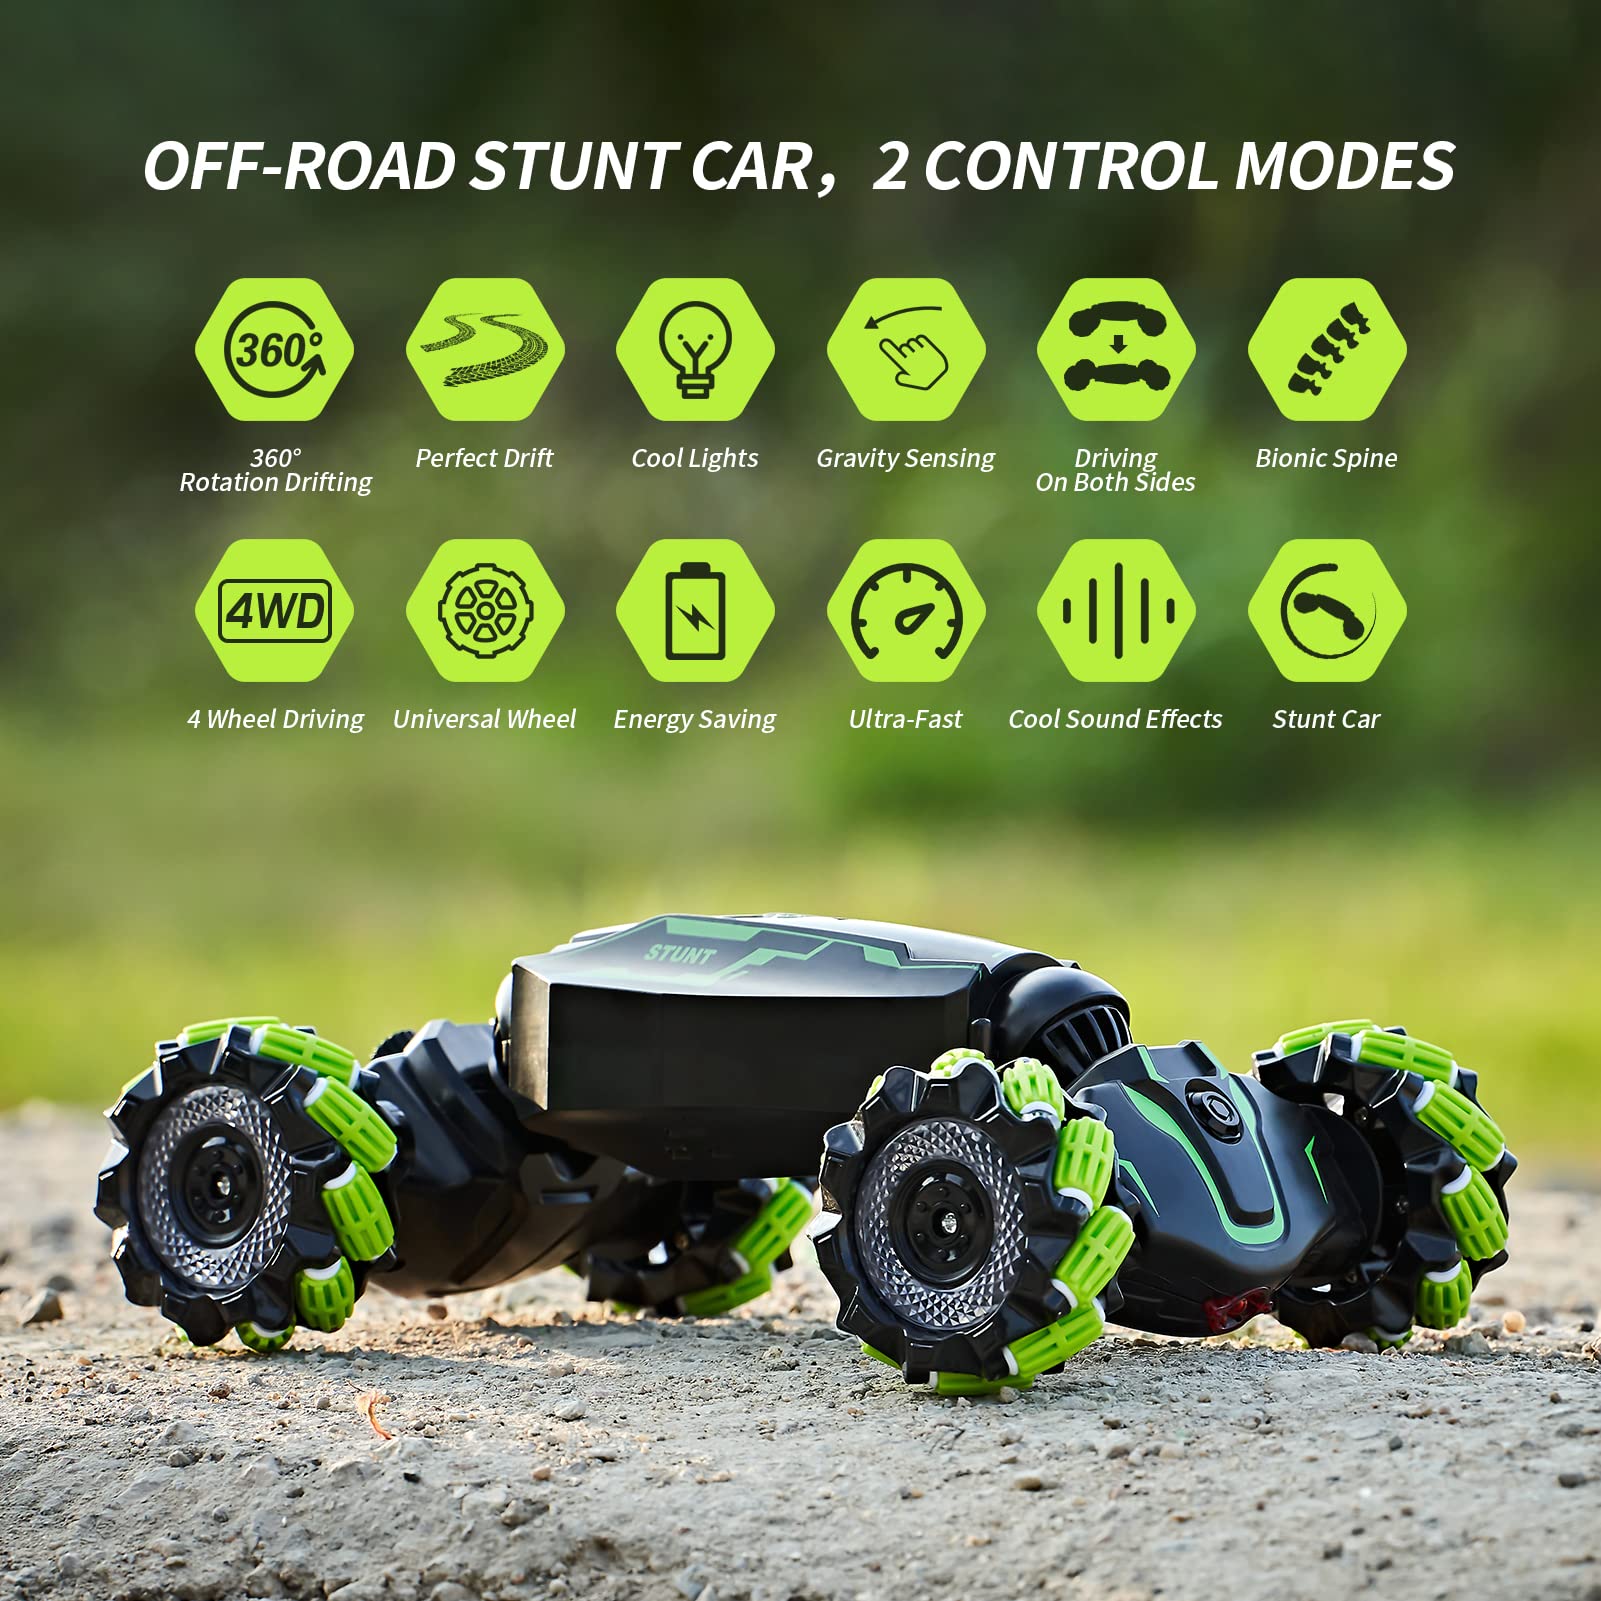 TADOZIC 4WD Remote Control Gesture Sensor Car,Hand Controlled RC Stunt Car,Double-Sided Vehicle 360° Rotation with Light and Music Spray, Watch Toy Cars for Boys & Girls Birthday